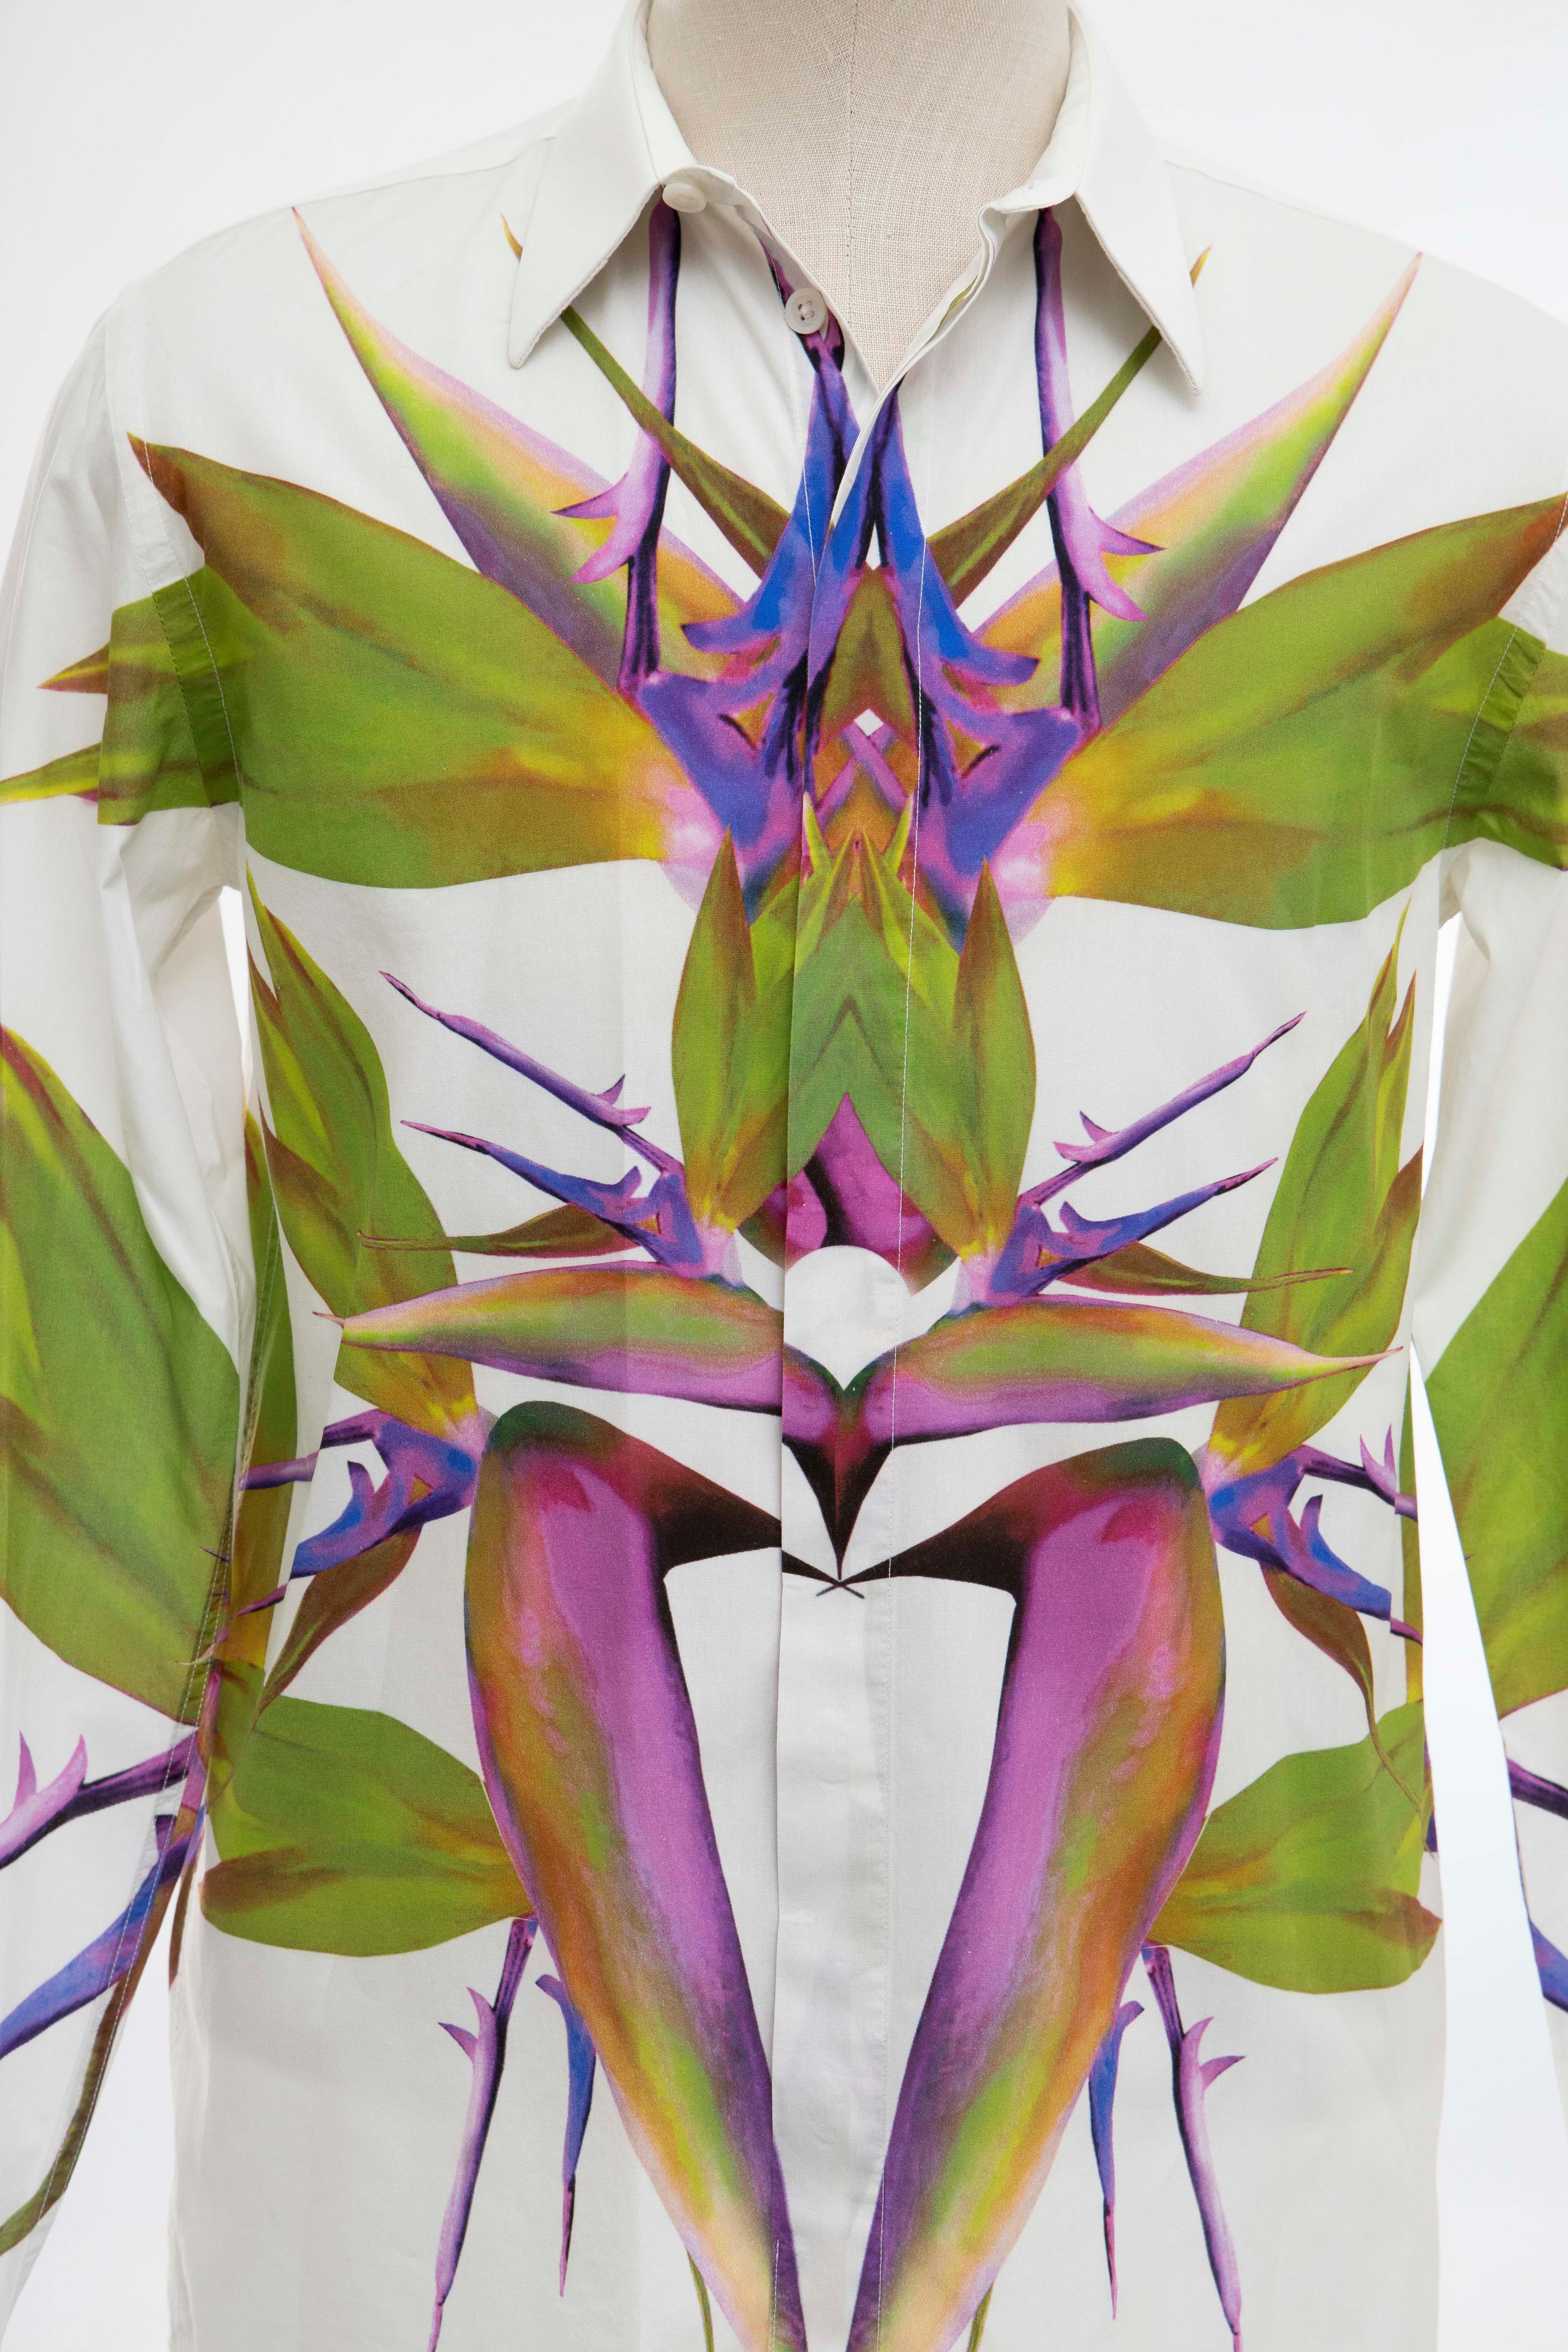 Riccardo Tisci for Givenchy, Runway Spring-Summer 2012, men's white cotton button front shirt with birds of paradise print, point collar,single button barrel cuffs and extra buttons.

EU. Small

Chest: 39, Length: 29, Sleeve: 25.5, Neck: